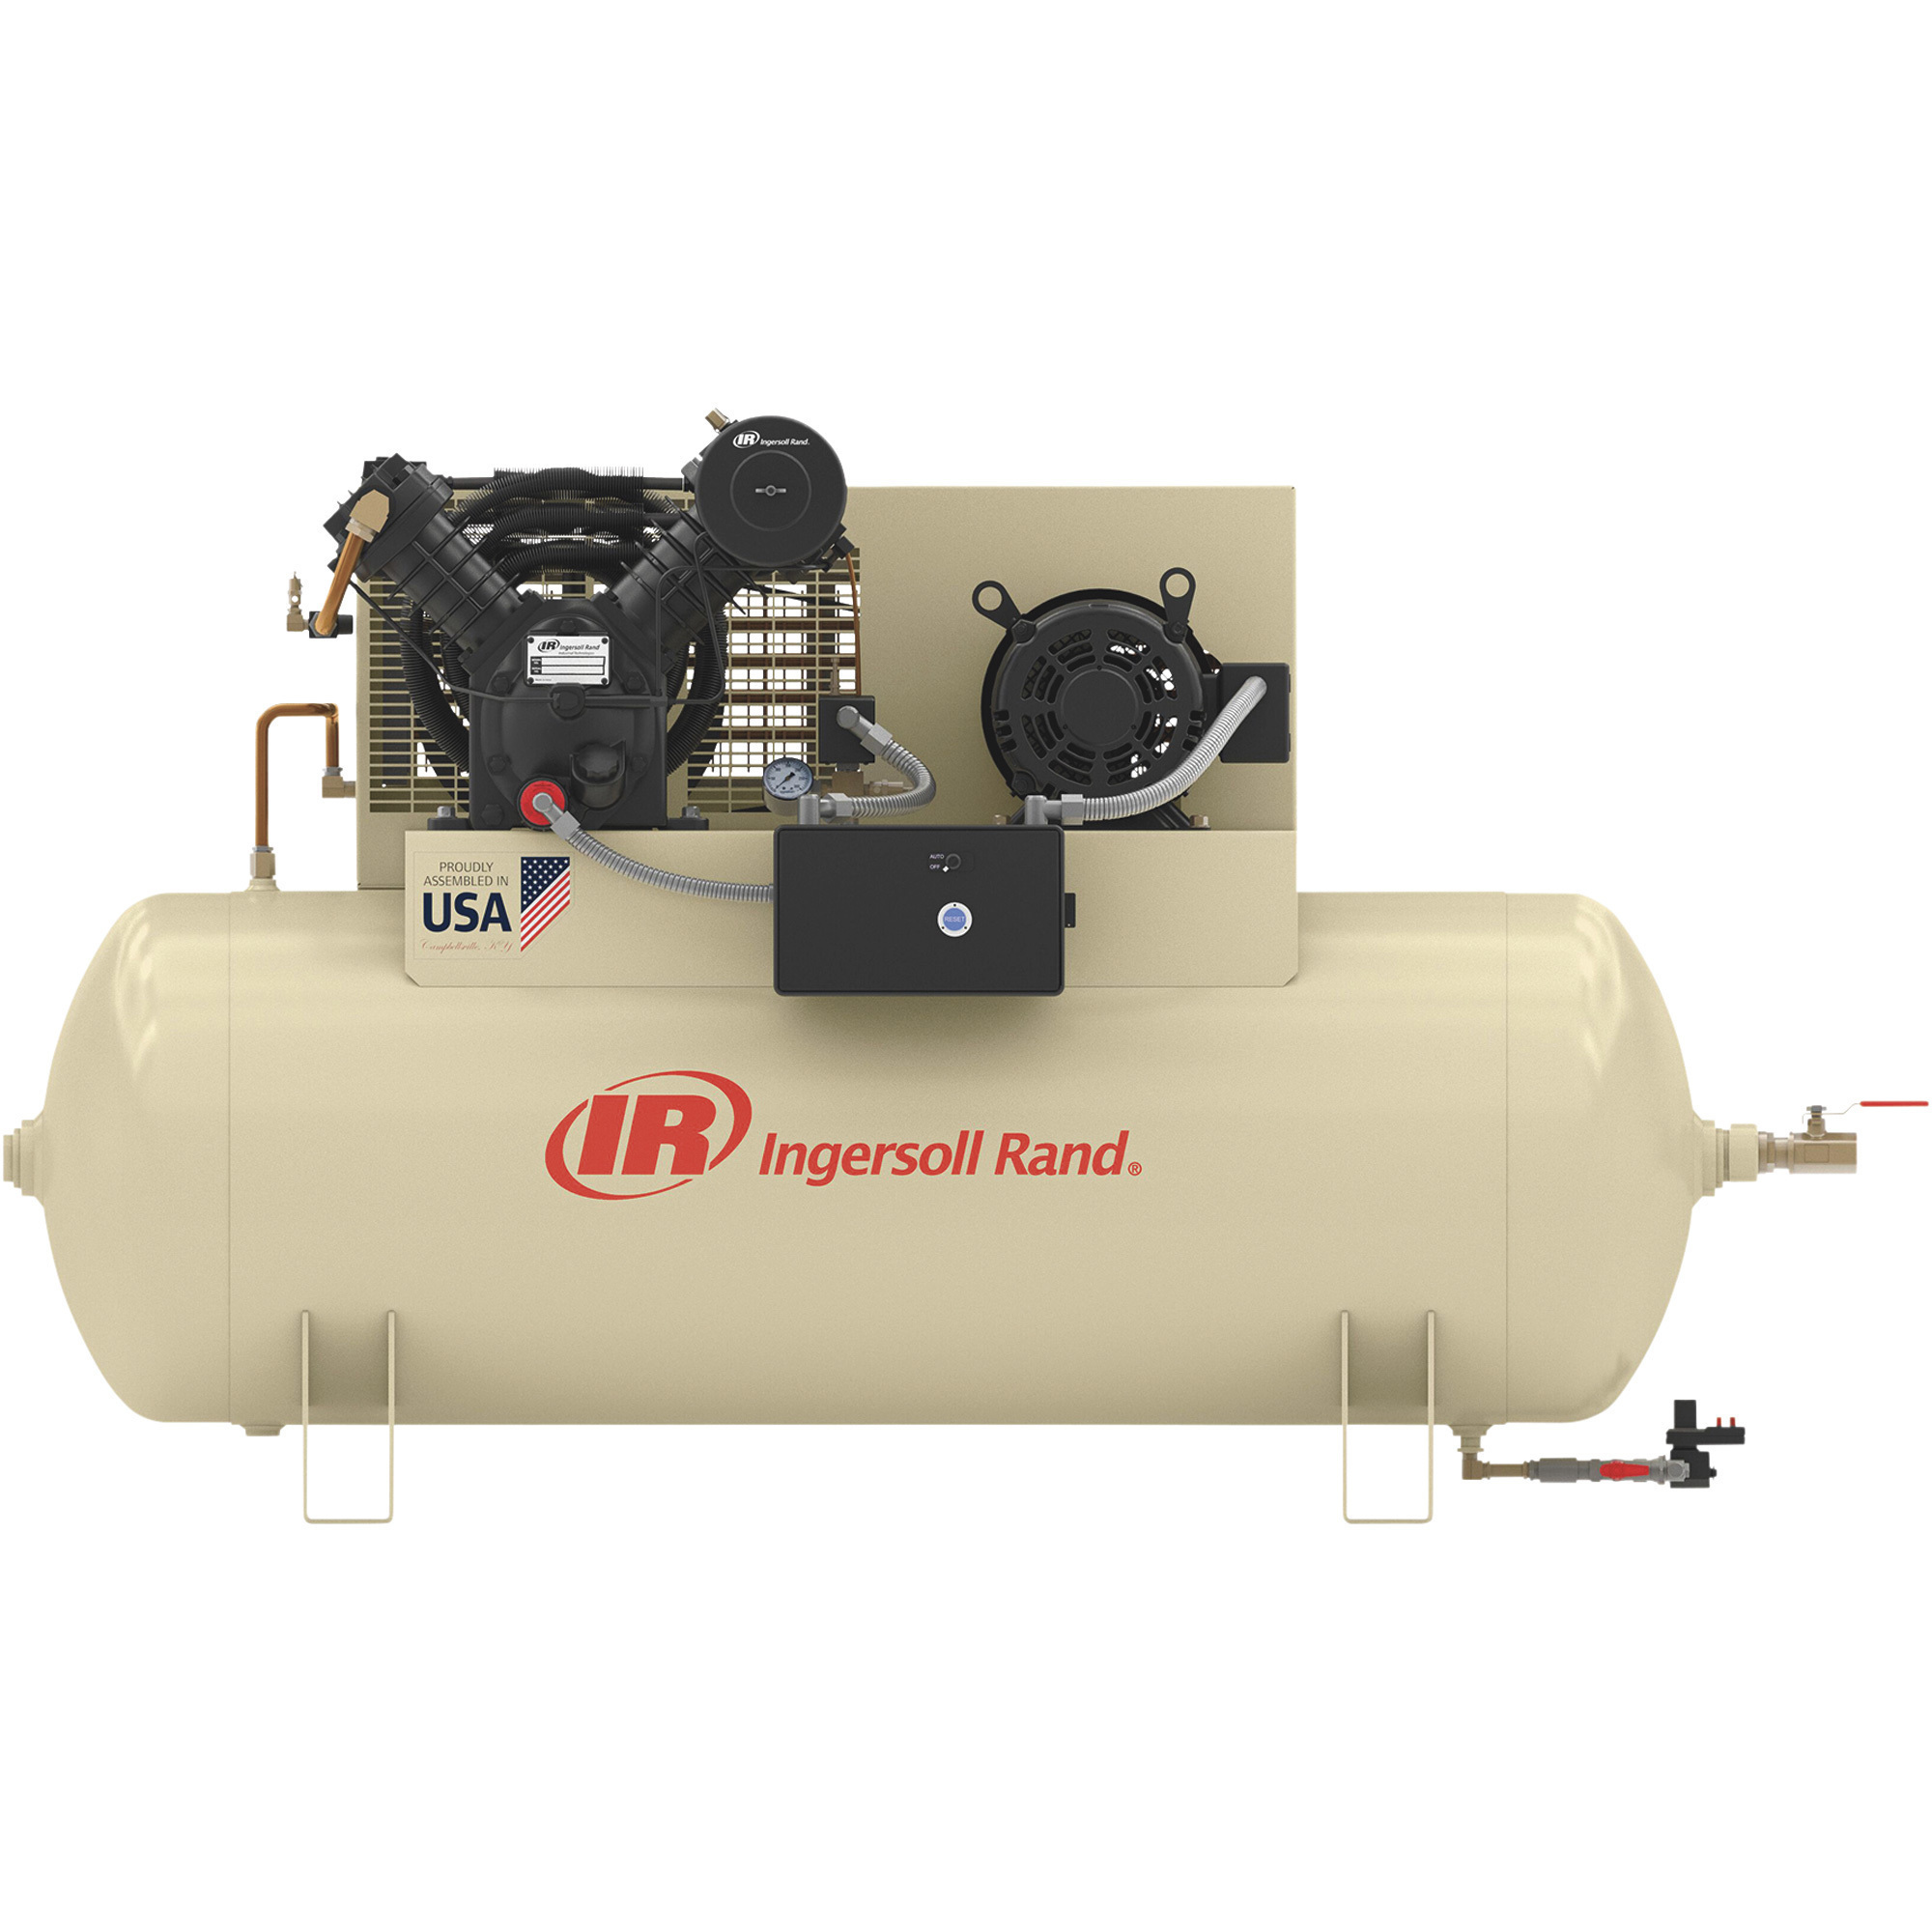 Ingersoll Rand Type-30 Reciprocating Air Compressor (Premium Package), 10 HP, 460 Volt, 3 Phase, 120 Gallon Horizontal, Model 2545E10-P